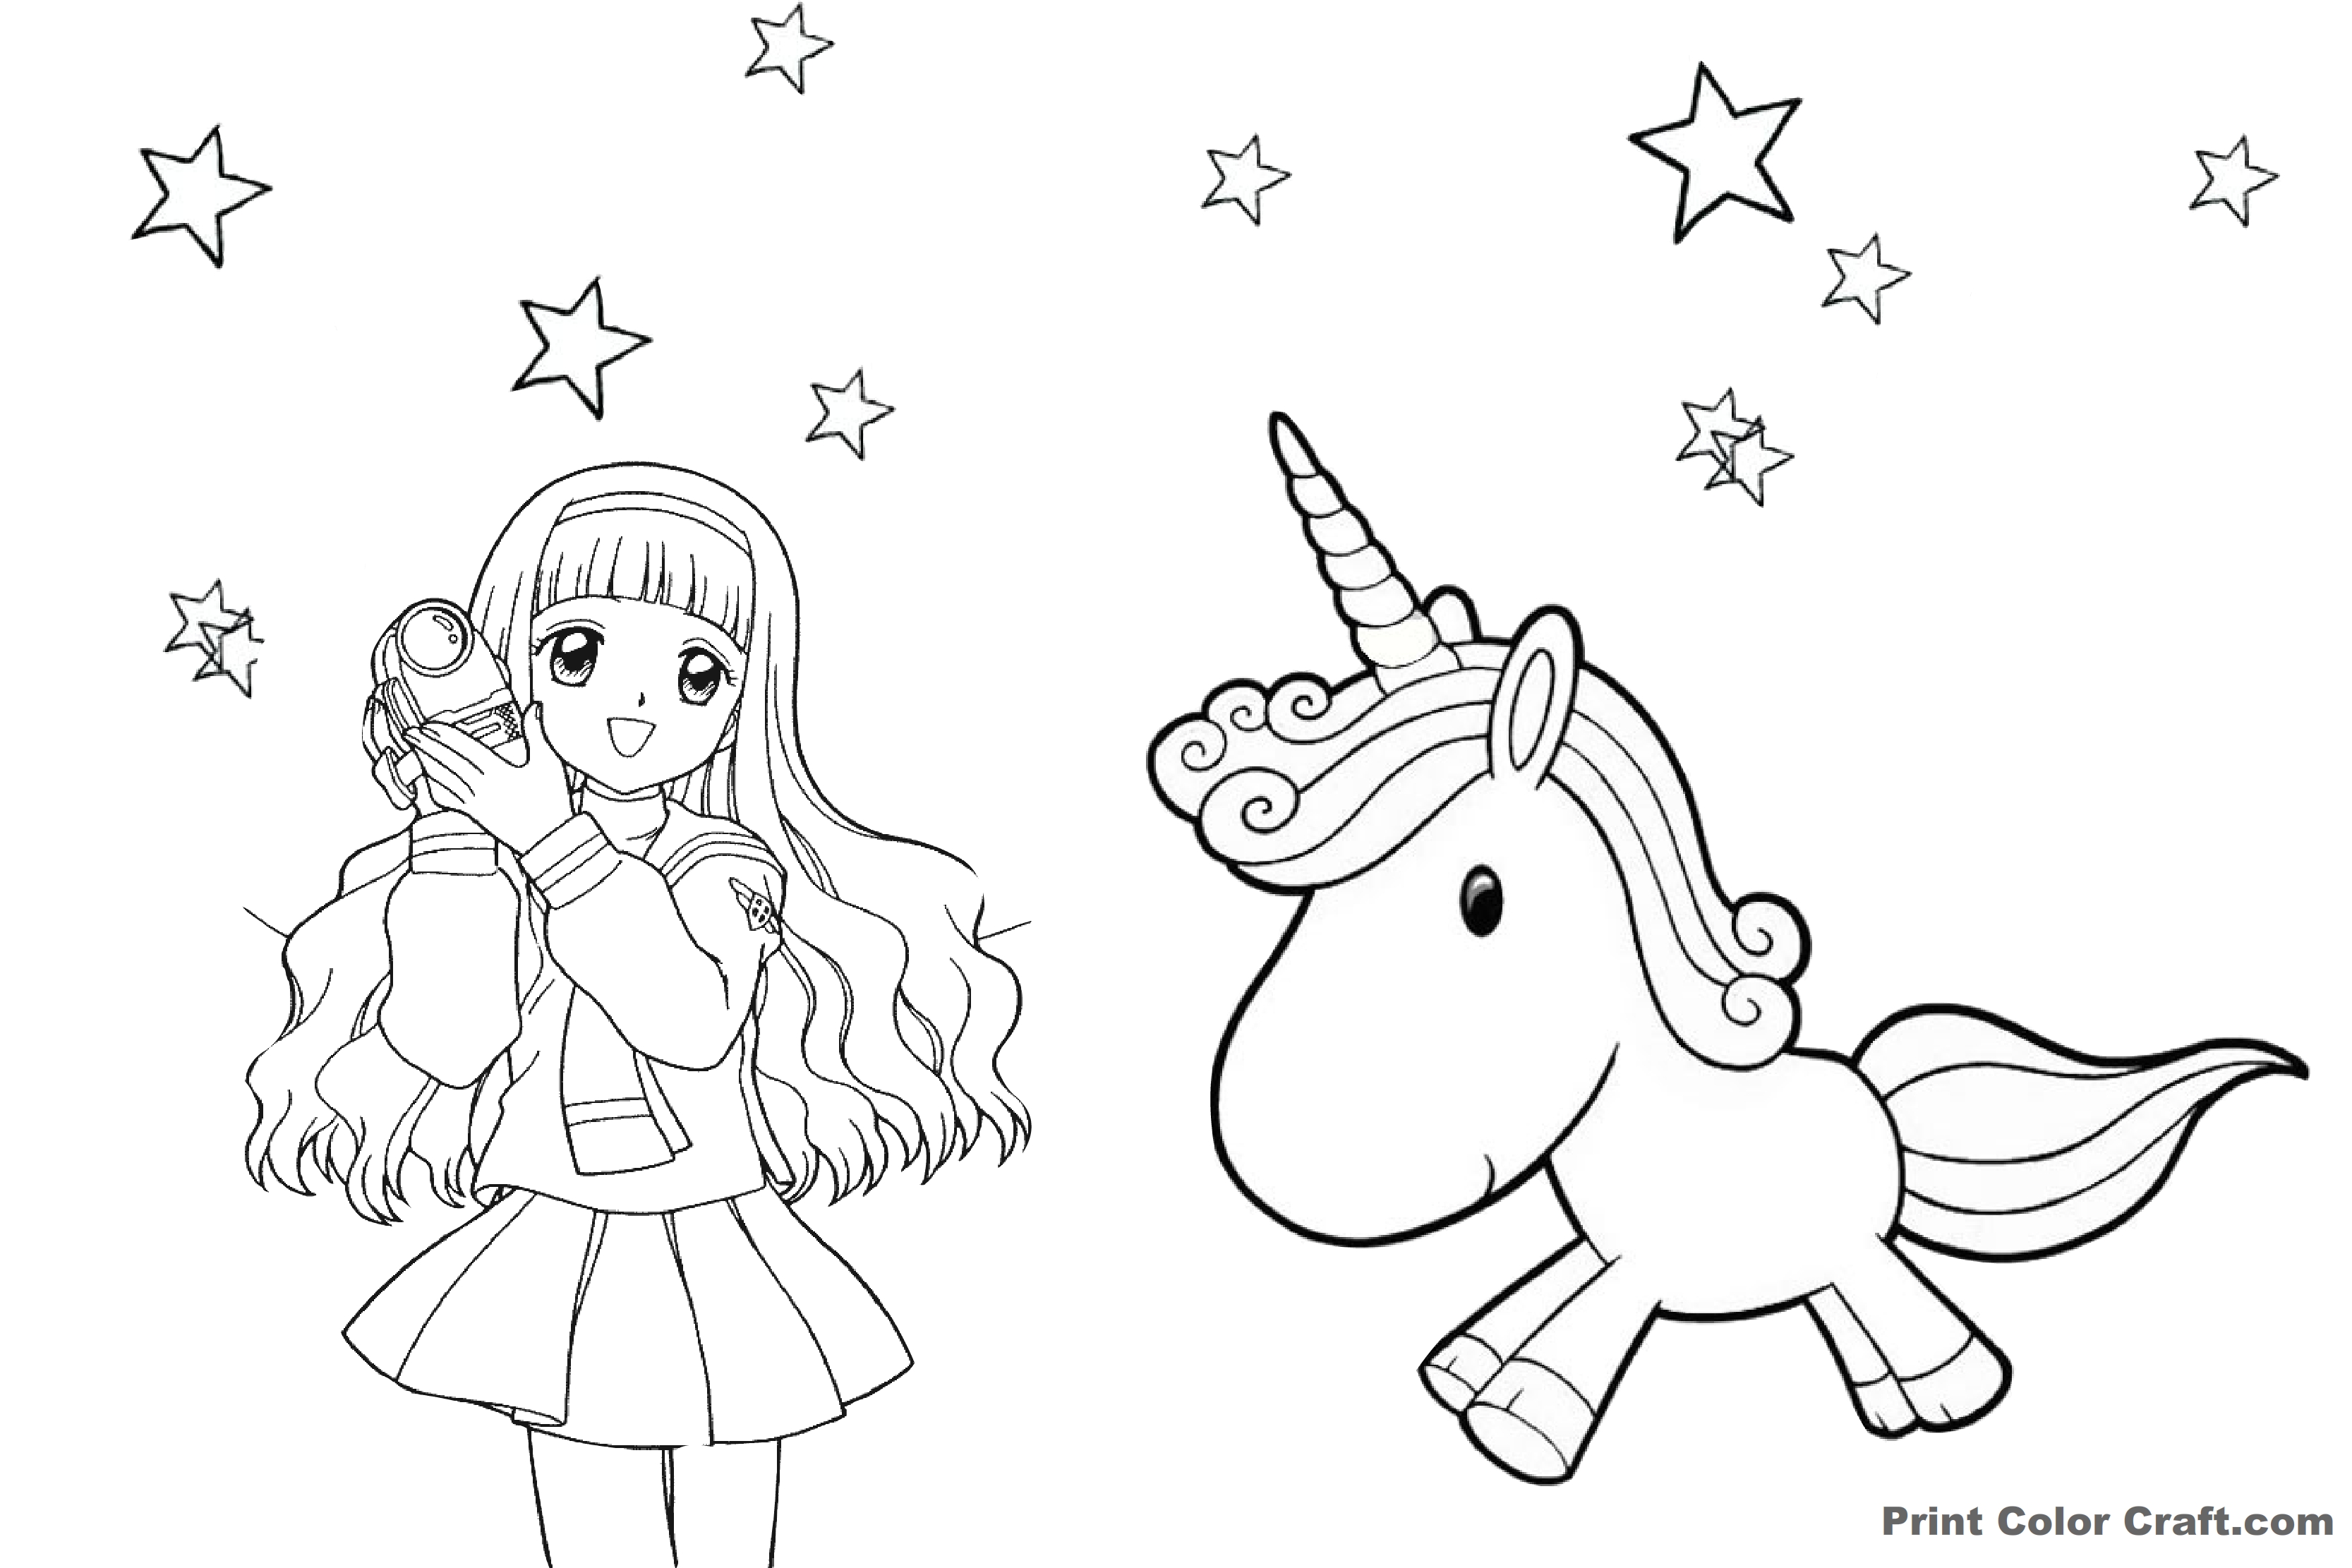 Unicorn Cute Anime Girl Coloring Page Coloring Pages